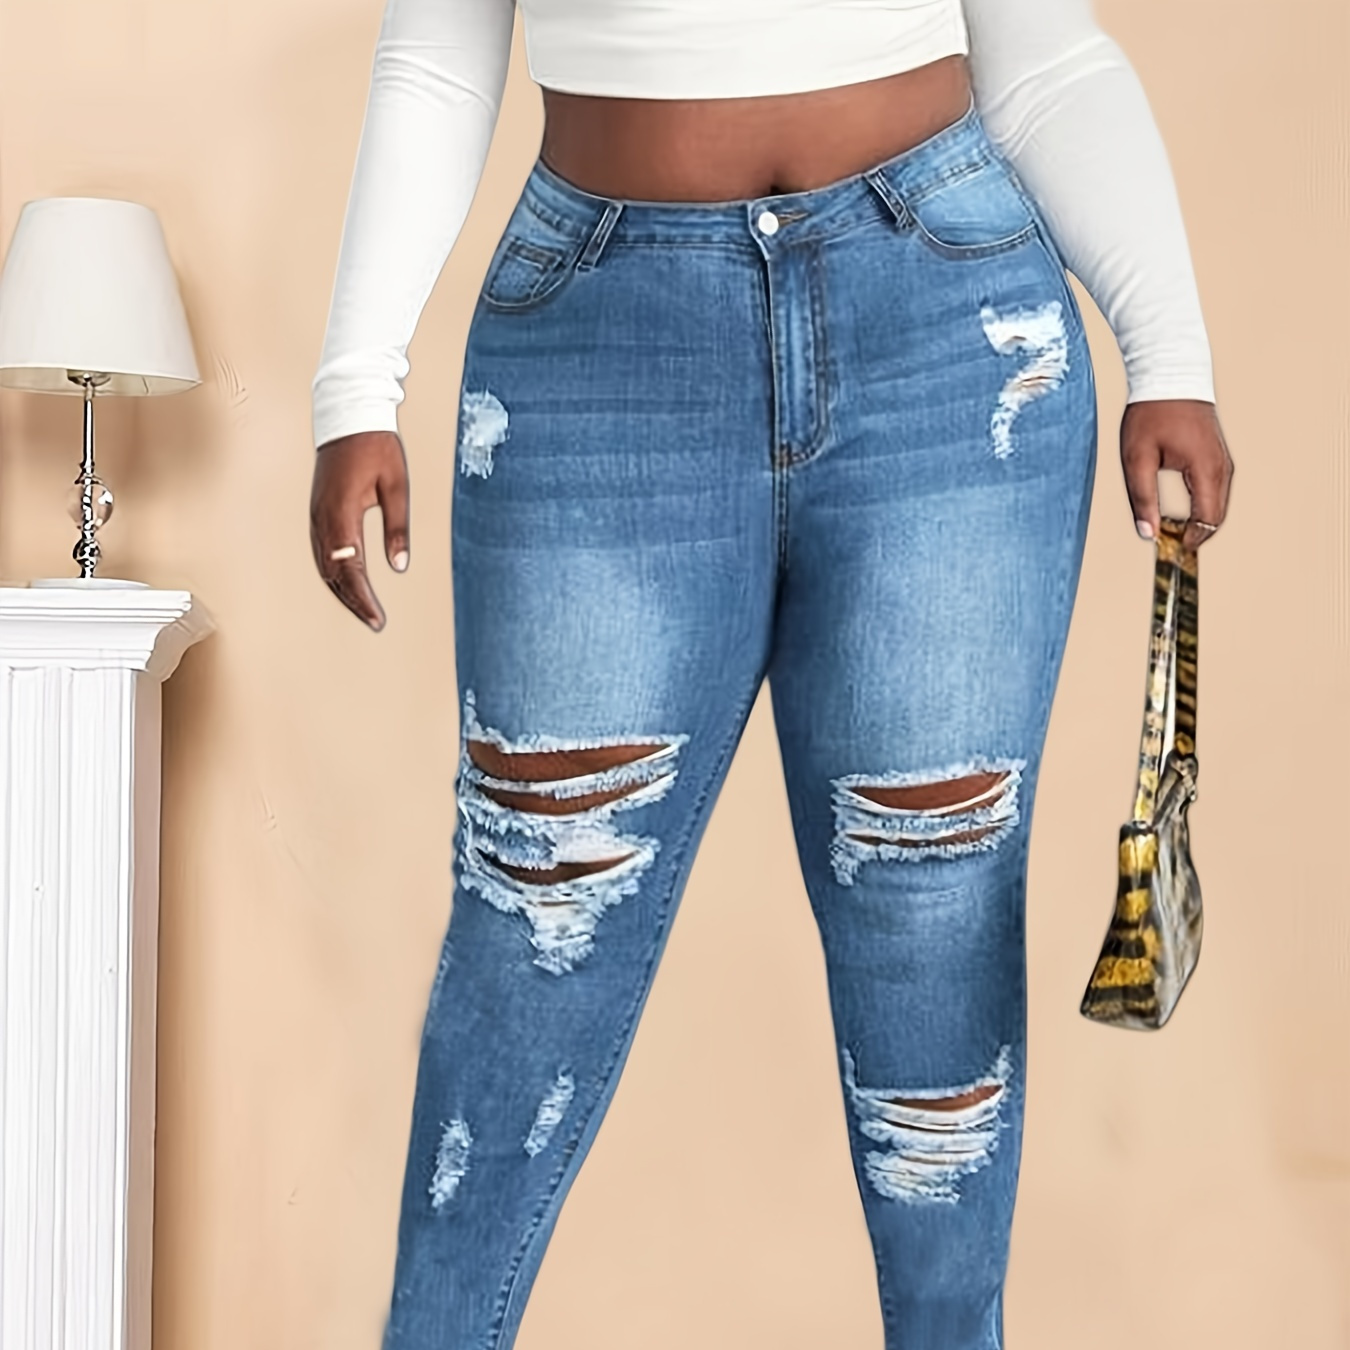 

Plus Size Ripped Original Rise Button Fly Skinny Jeans, Women's Plus High Stretch Casual Denim Jeans